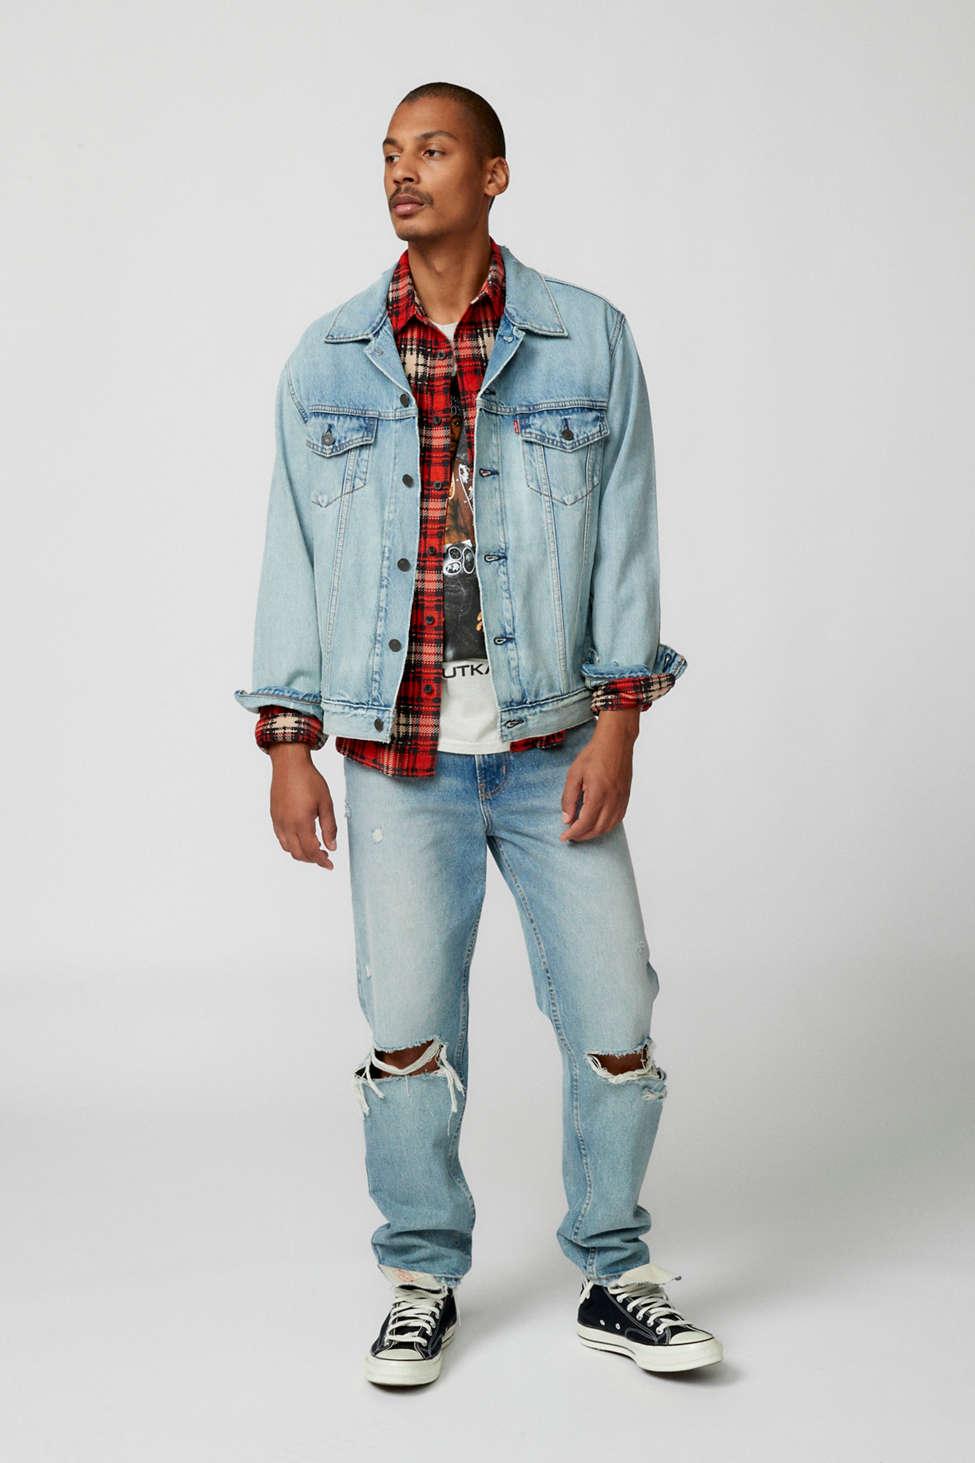 Vintage Relaxed Fit Trucker Jacket - Light Wash